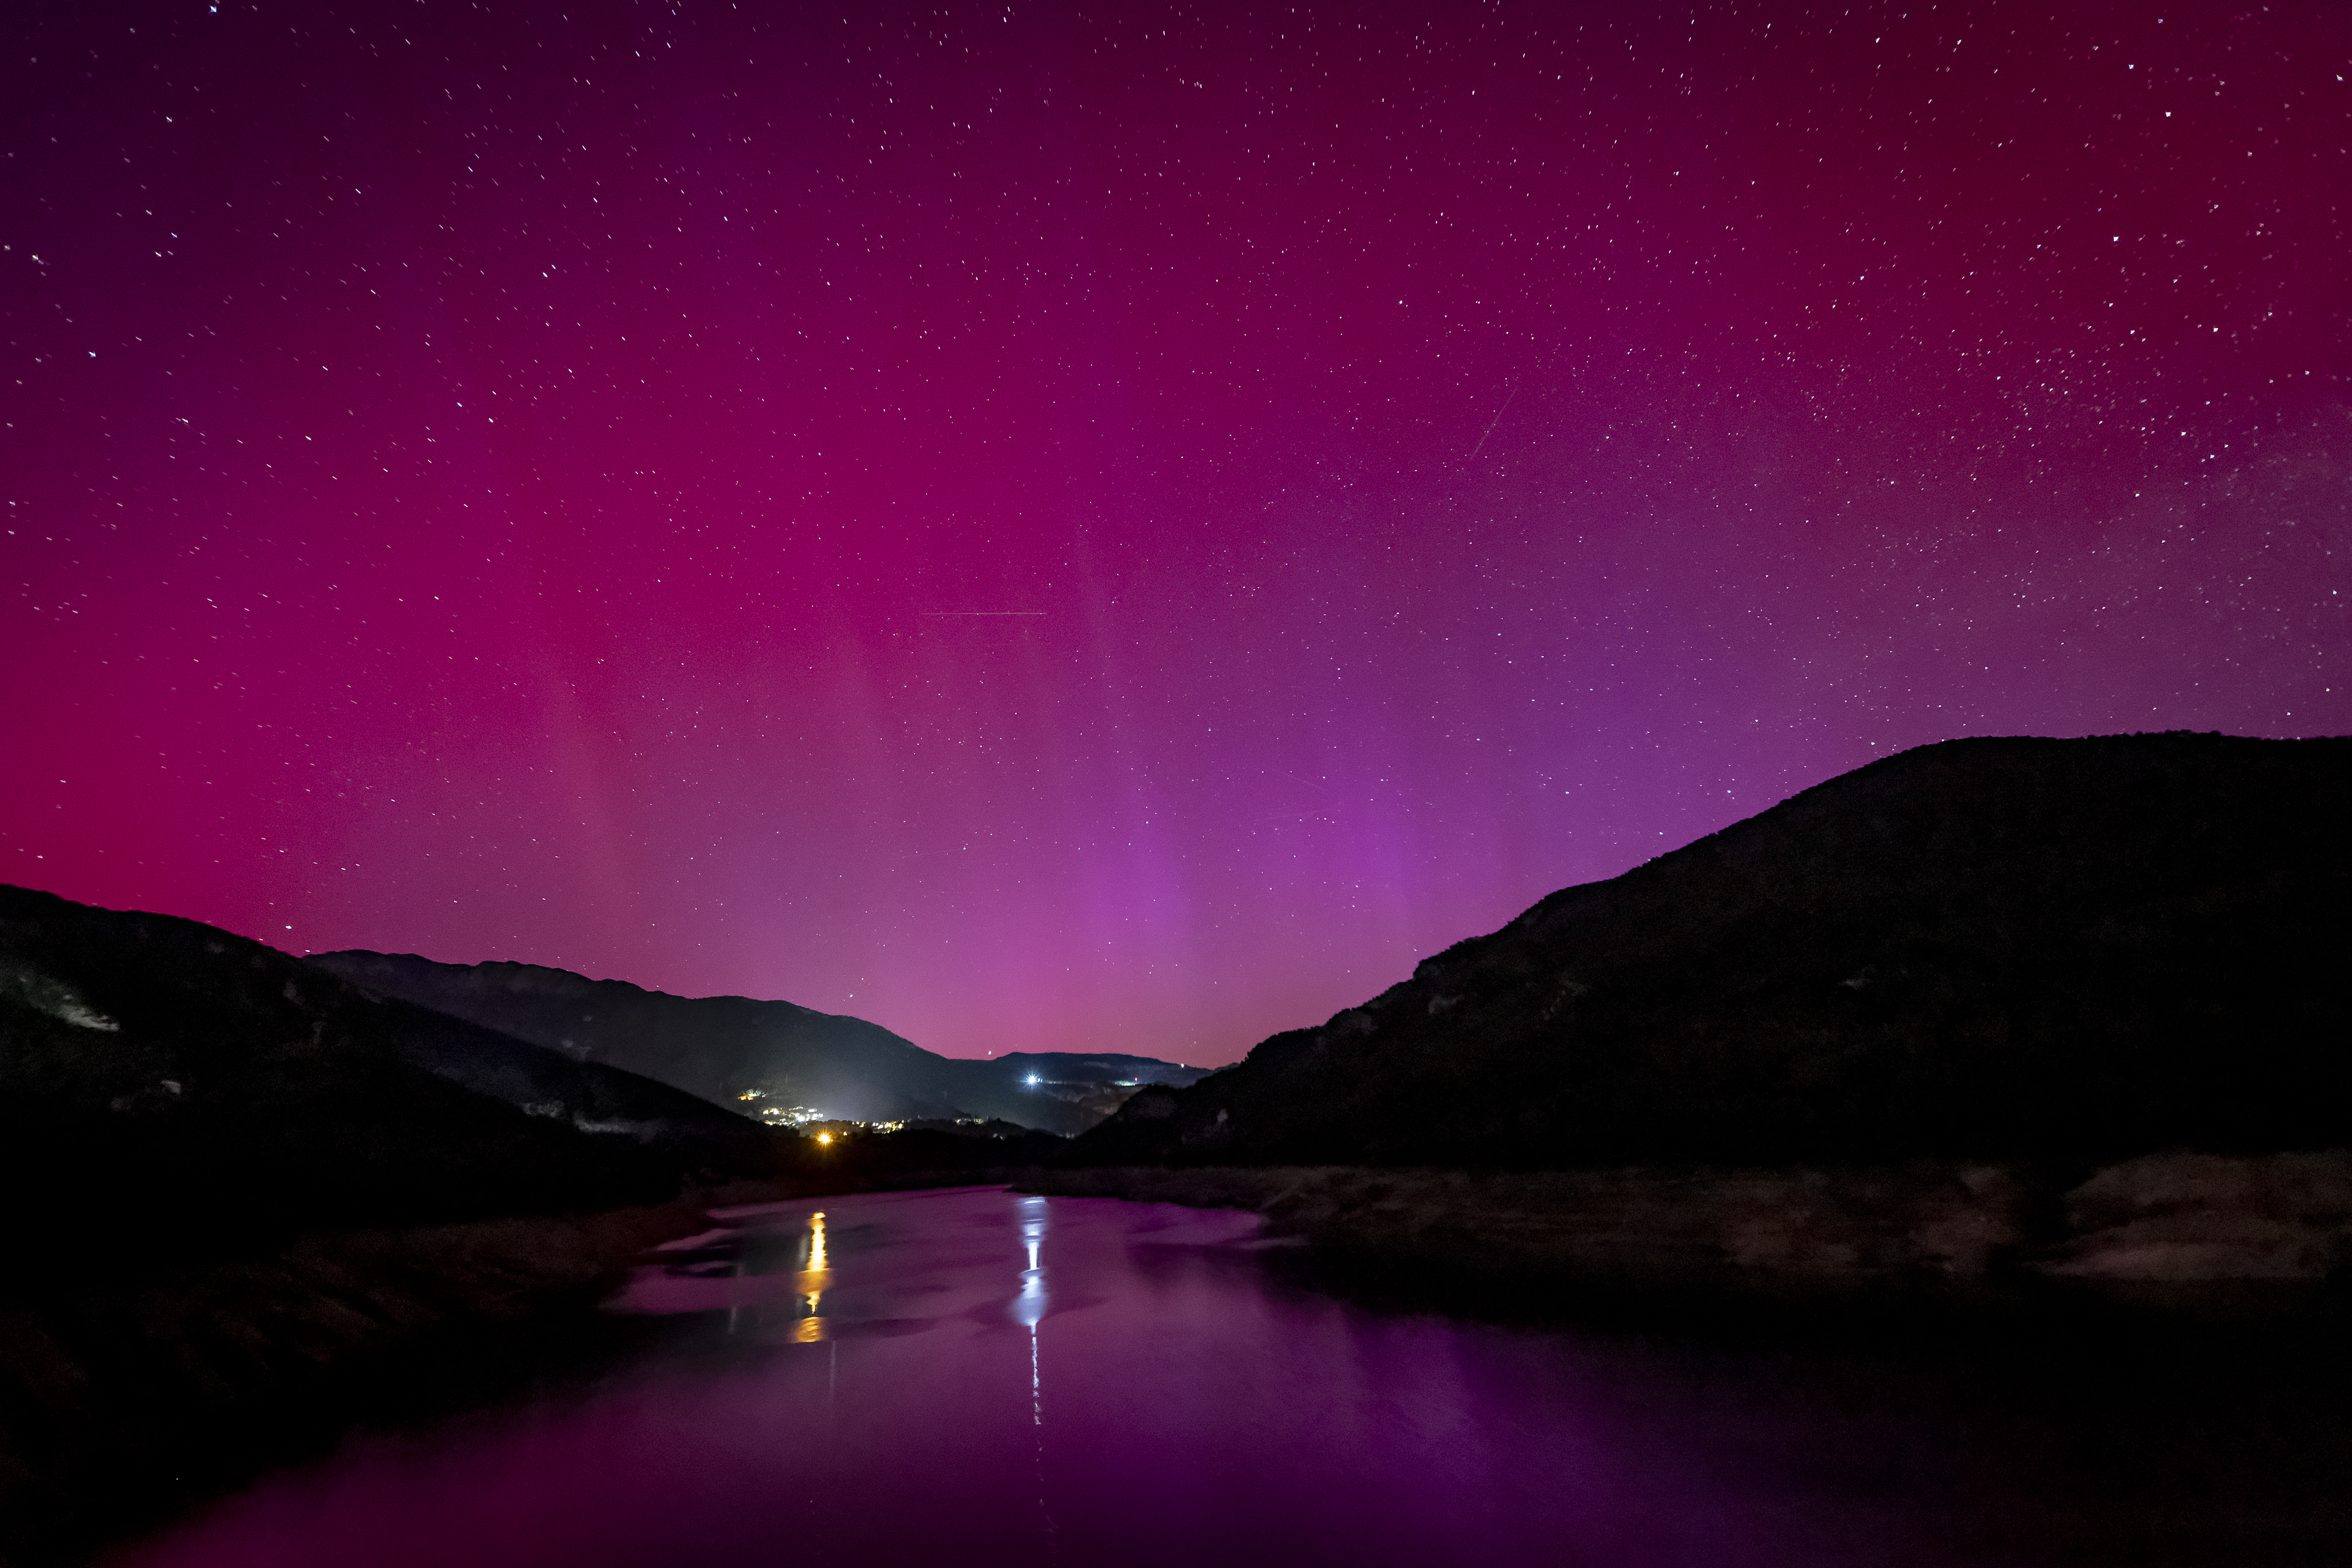 Pink and purple hues of the northern lights over Berga, Spain.